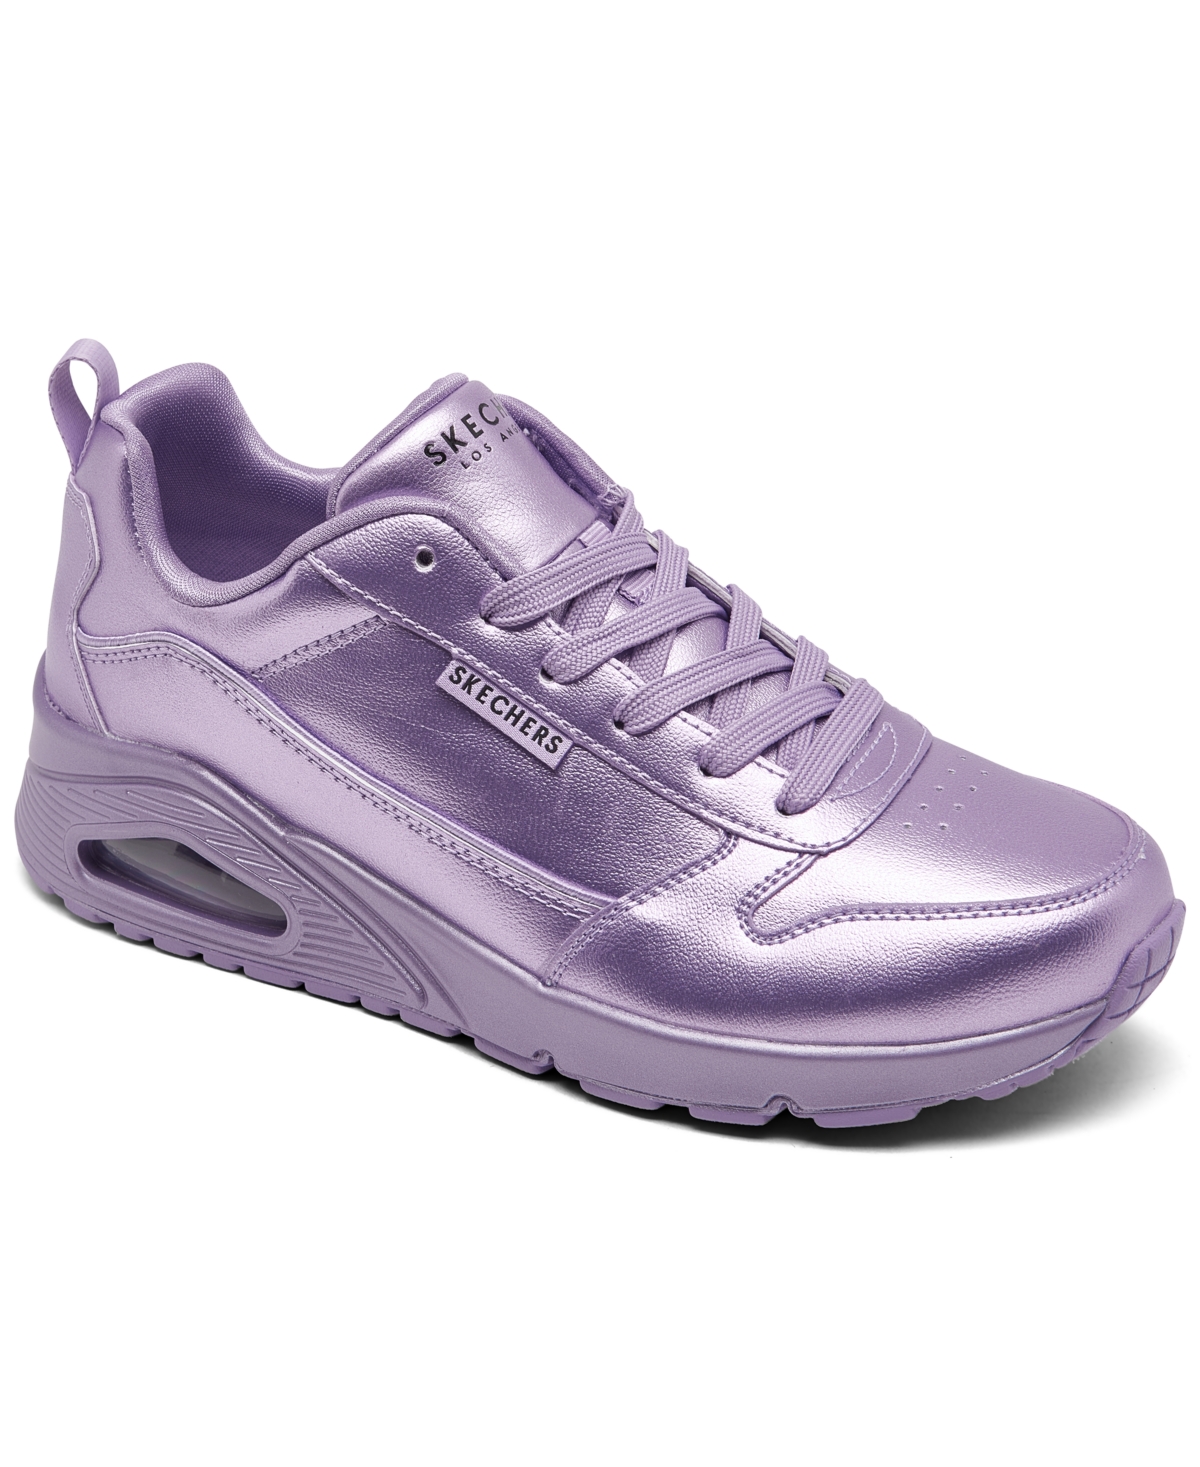 Street Women's Uno - Galactic Gal Casual Sneakers from Finish Line - Lavendar